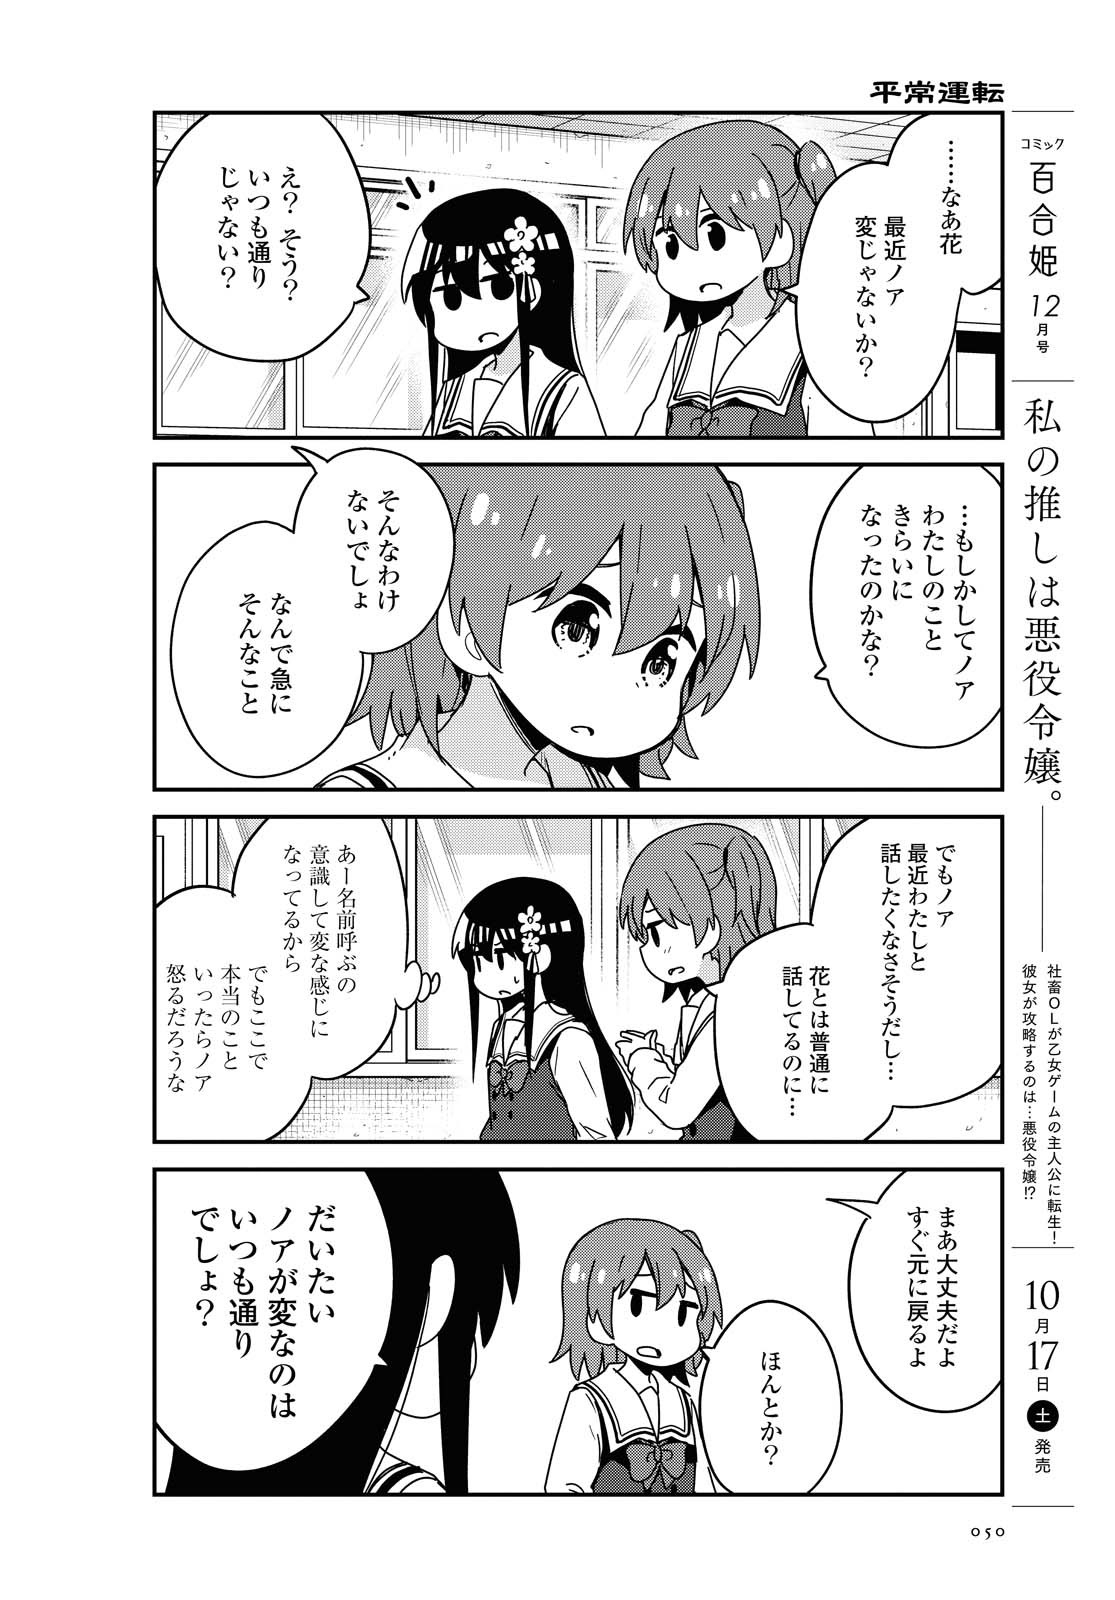 Wataten! An Angel Flew Down to Me 私に天使が舞い降りた！ 第70話 - Page 8